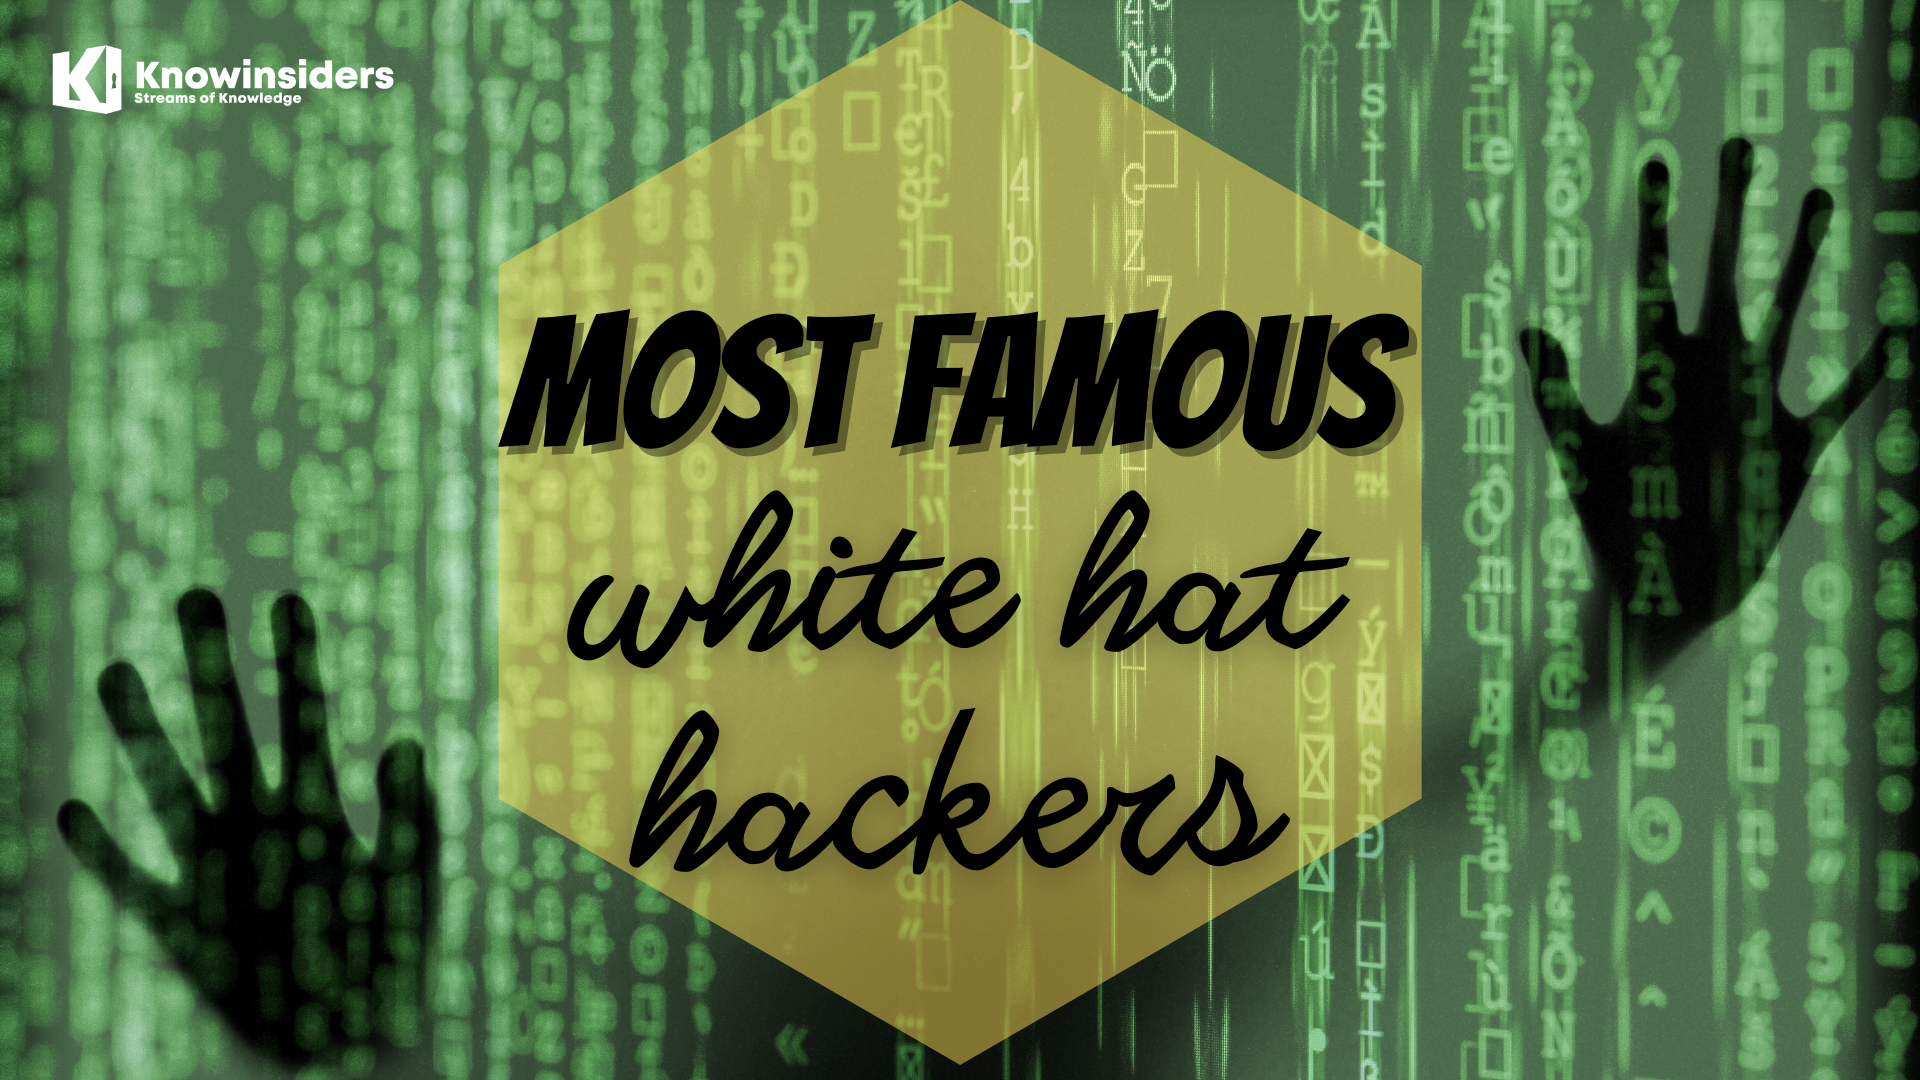 Top 10 Most Famous White Hat Hackers Of All Time. Photo: knowinsiders.